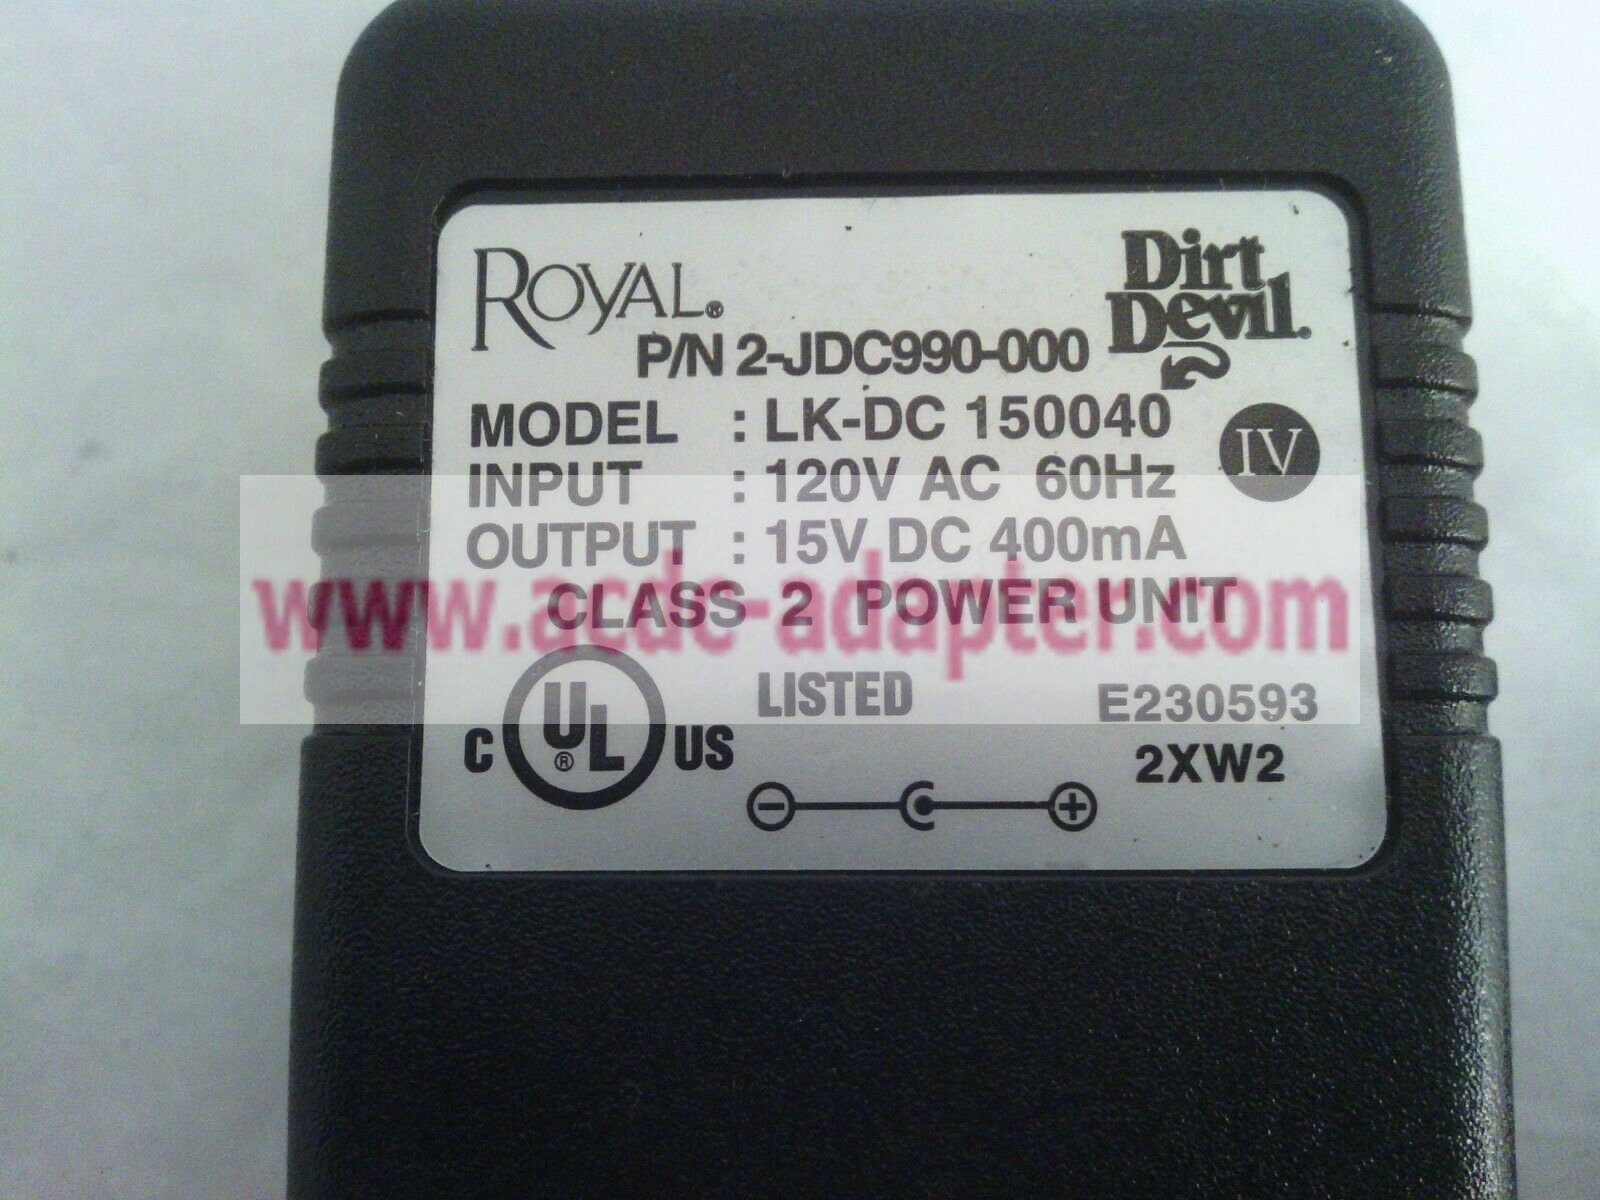 New Royal Dirt Devil LK-DC 150040 2-JDC990-000 15V 400mA AC/DC Adapter Charger - Click Image to Close